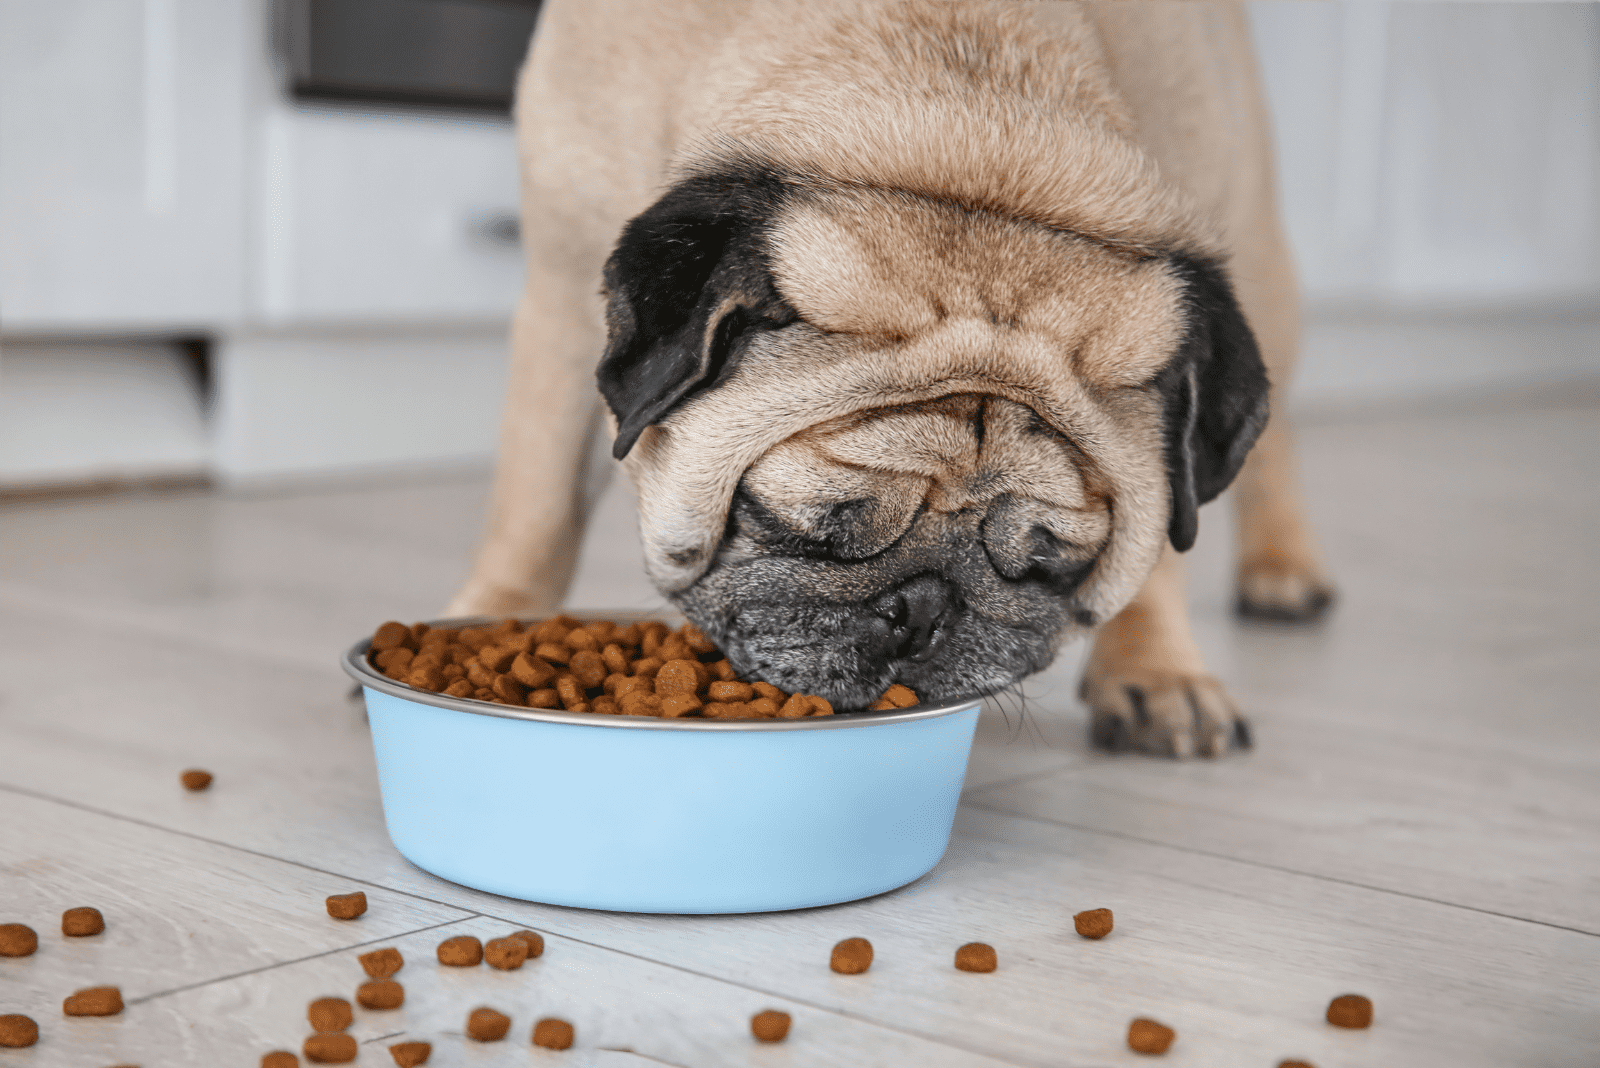 pug eats food from a bowl